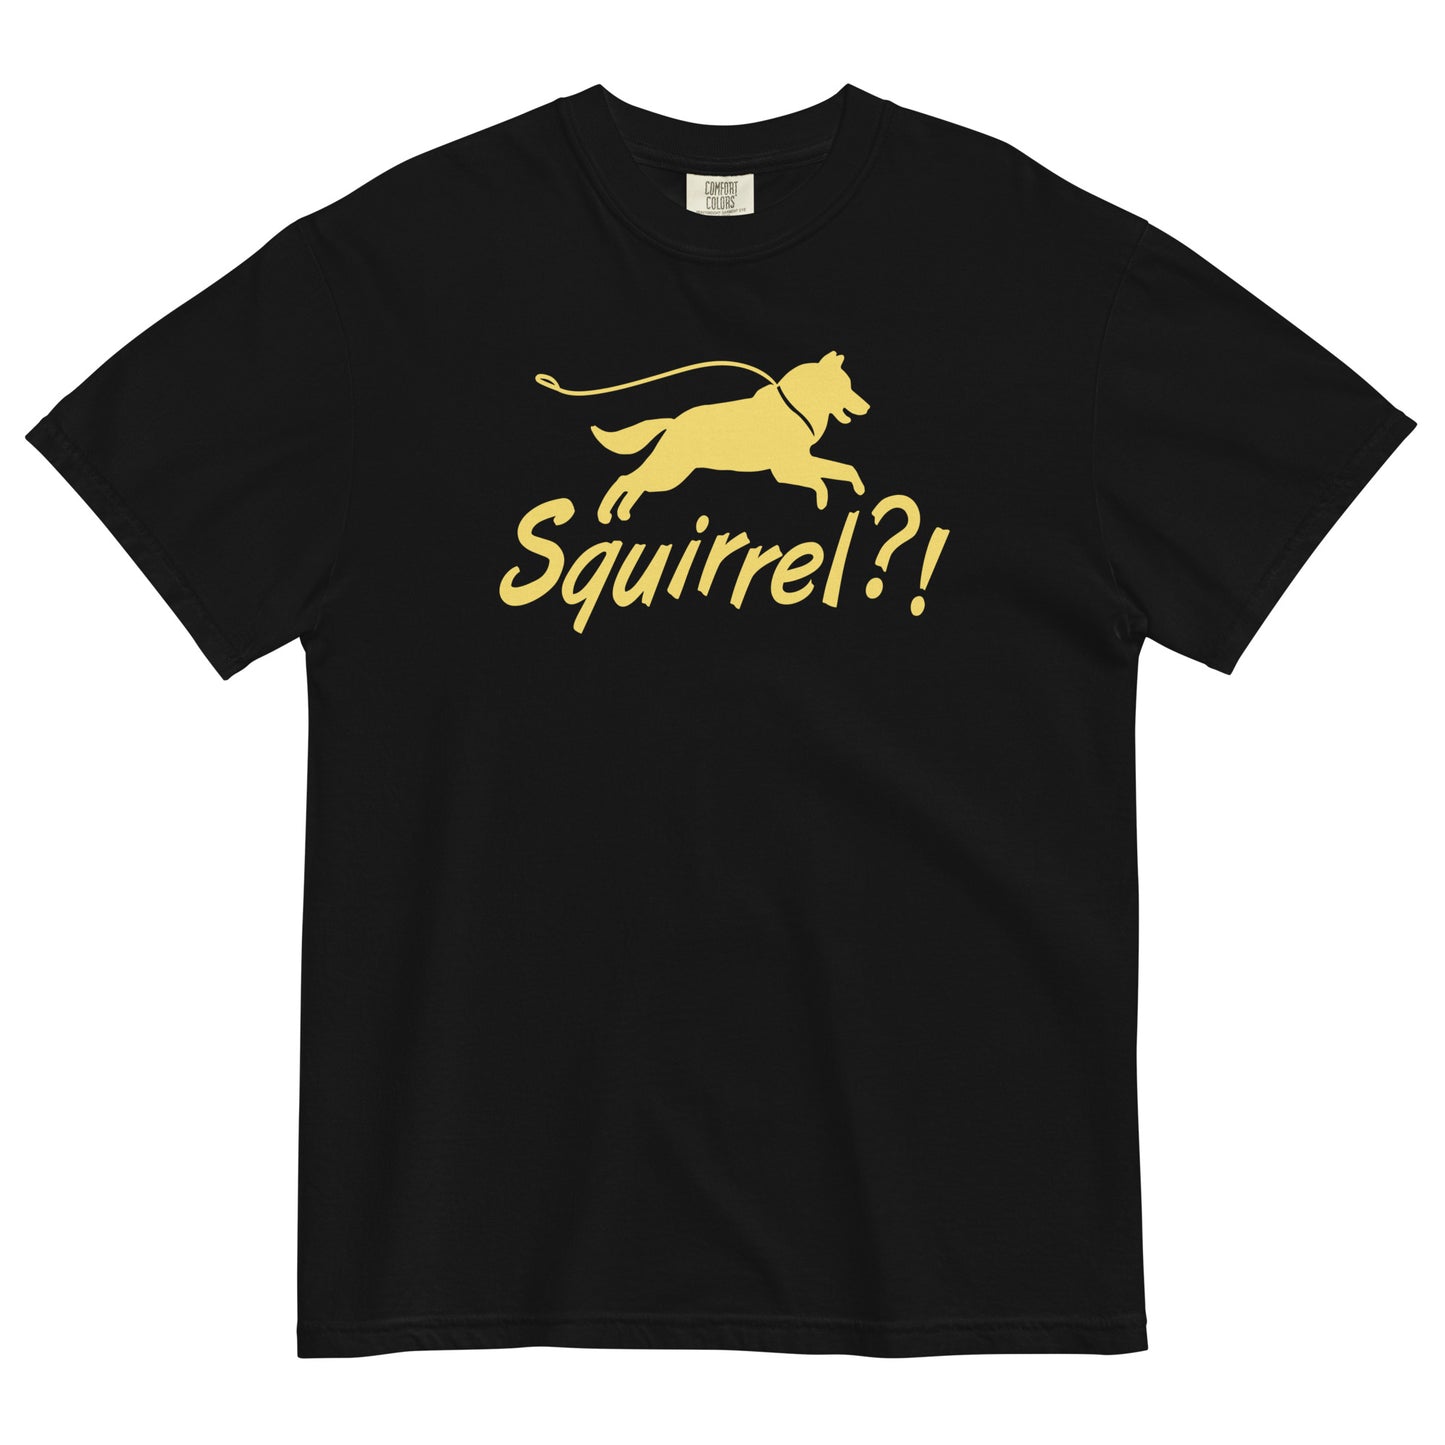 Squirrel?! Men's Relaxed Fit Tee